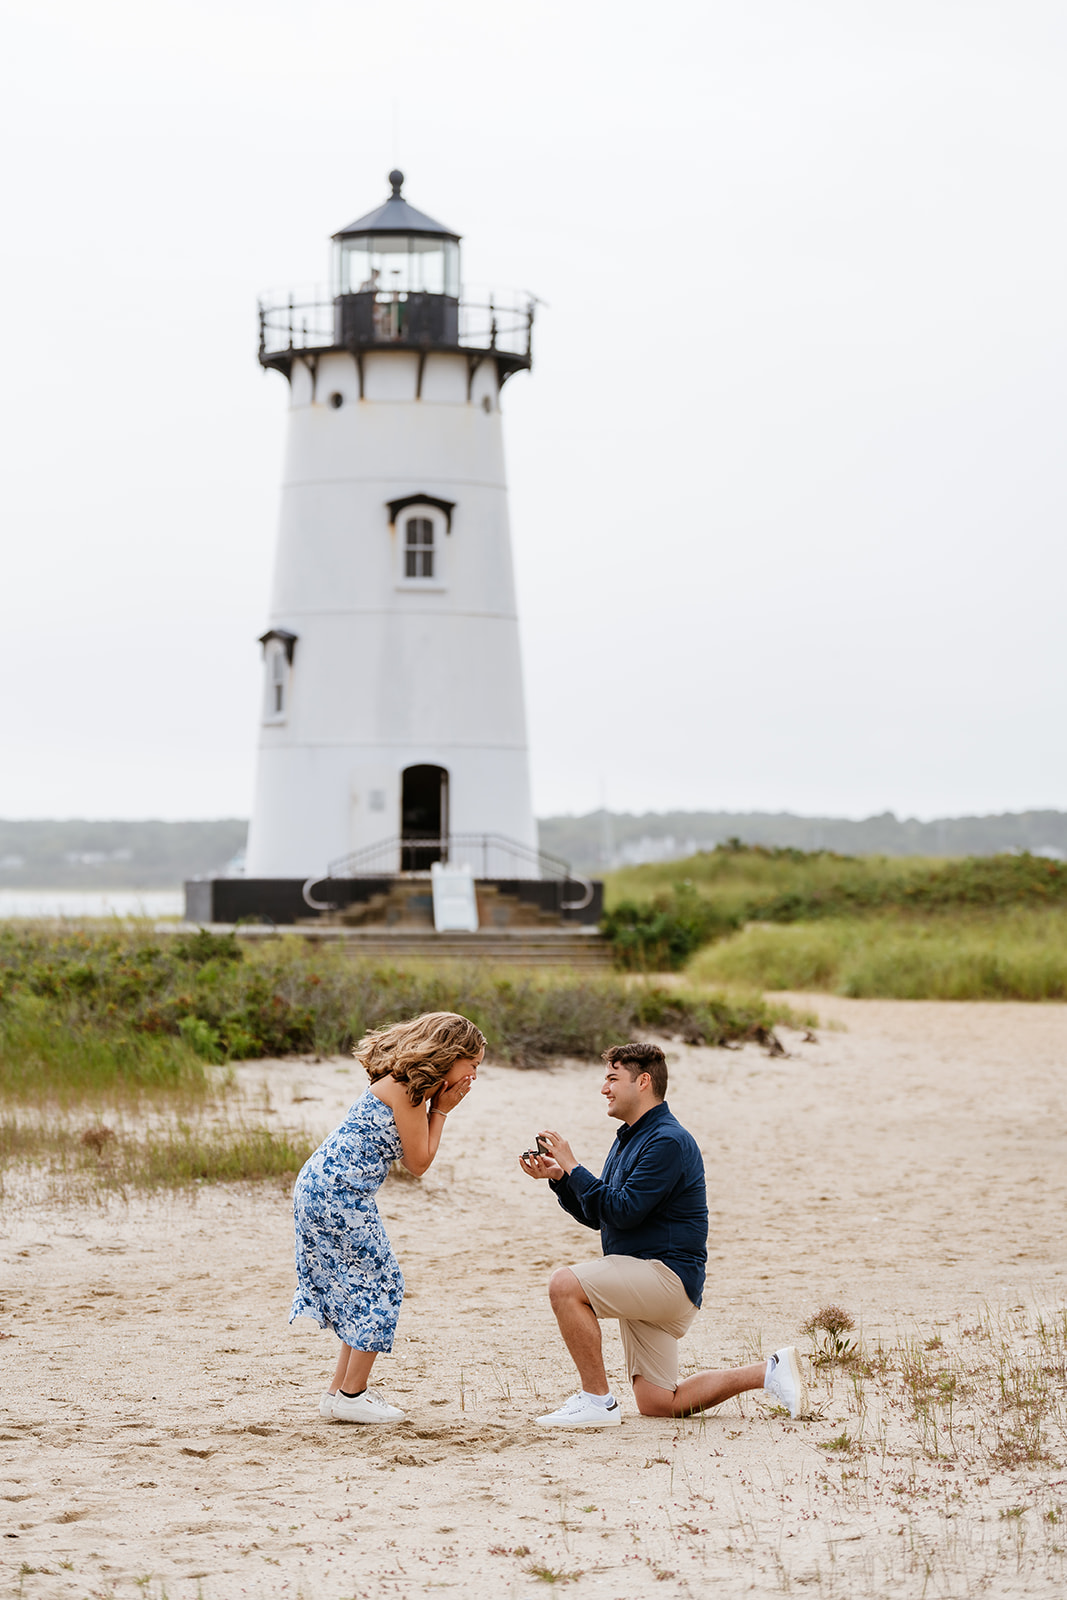 Man proposing to woman on one knee on sandy beach with Edgartown Harbor Lighthouse in the background.